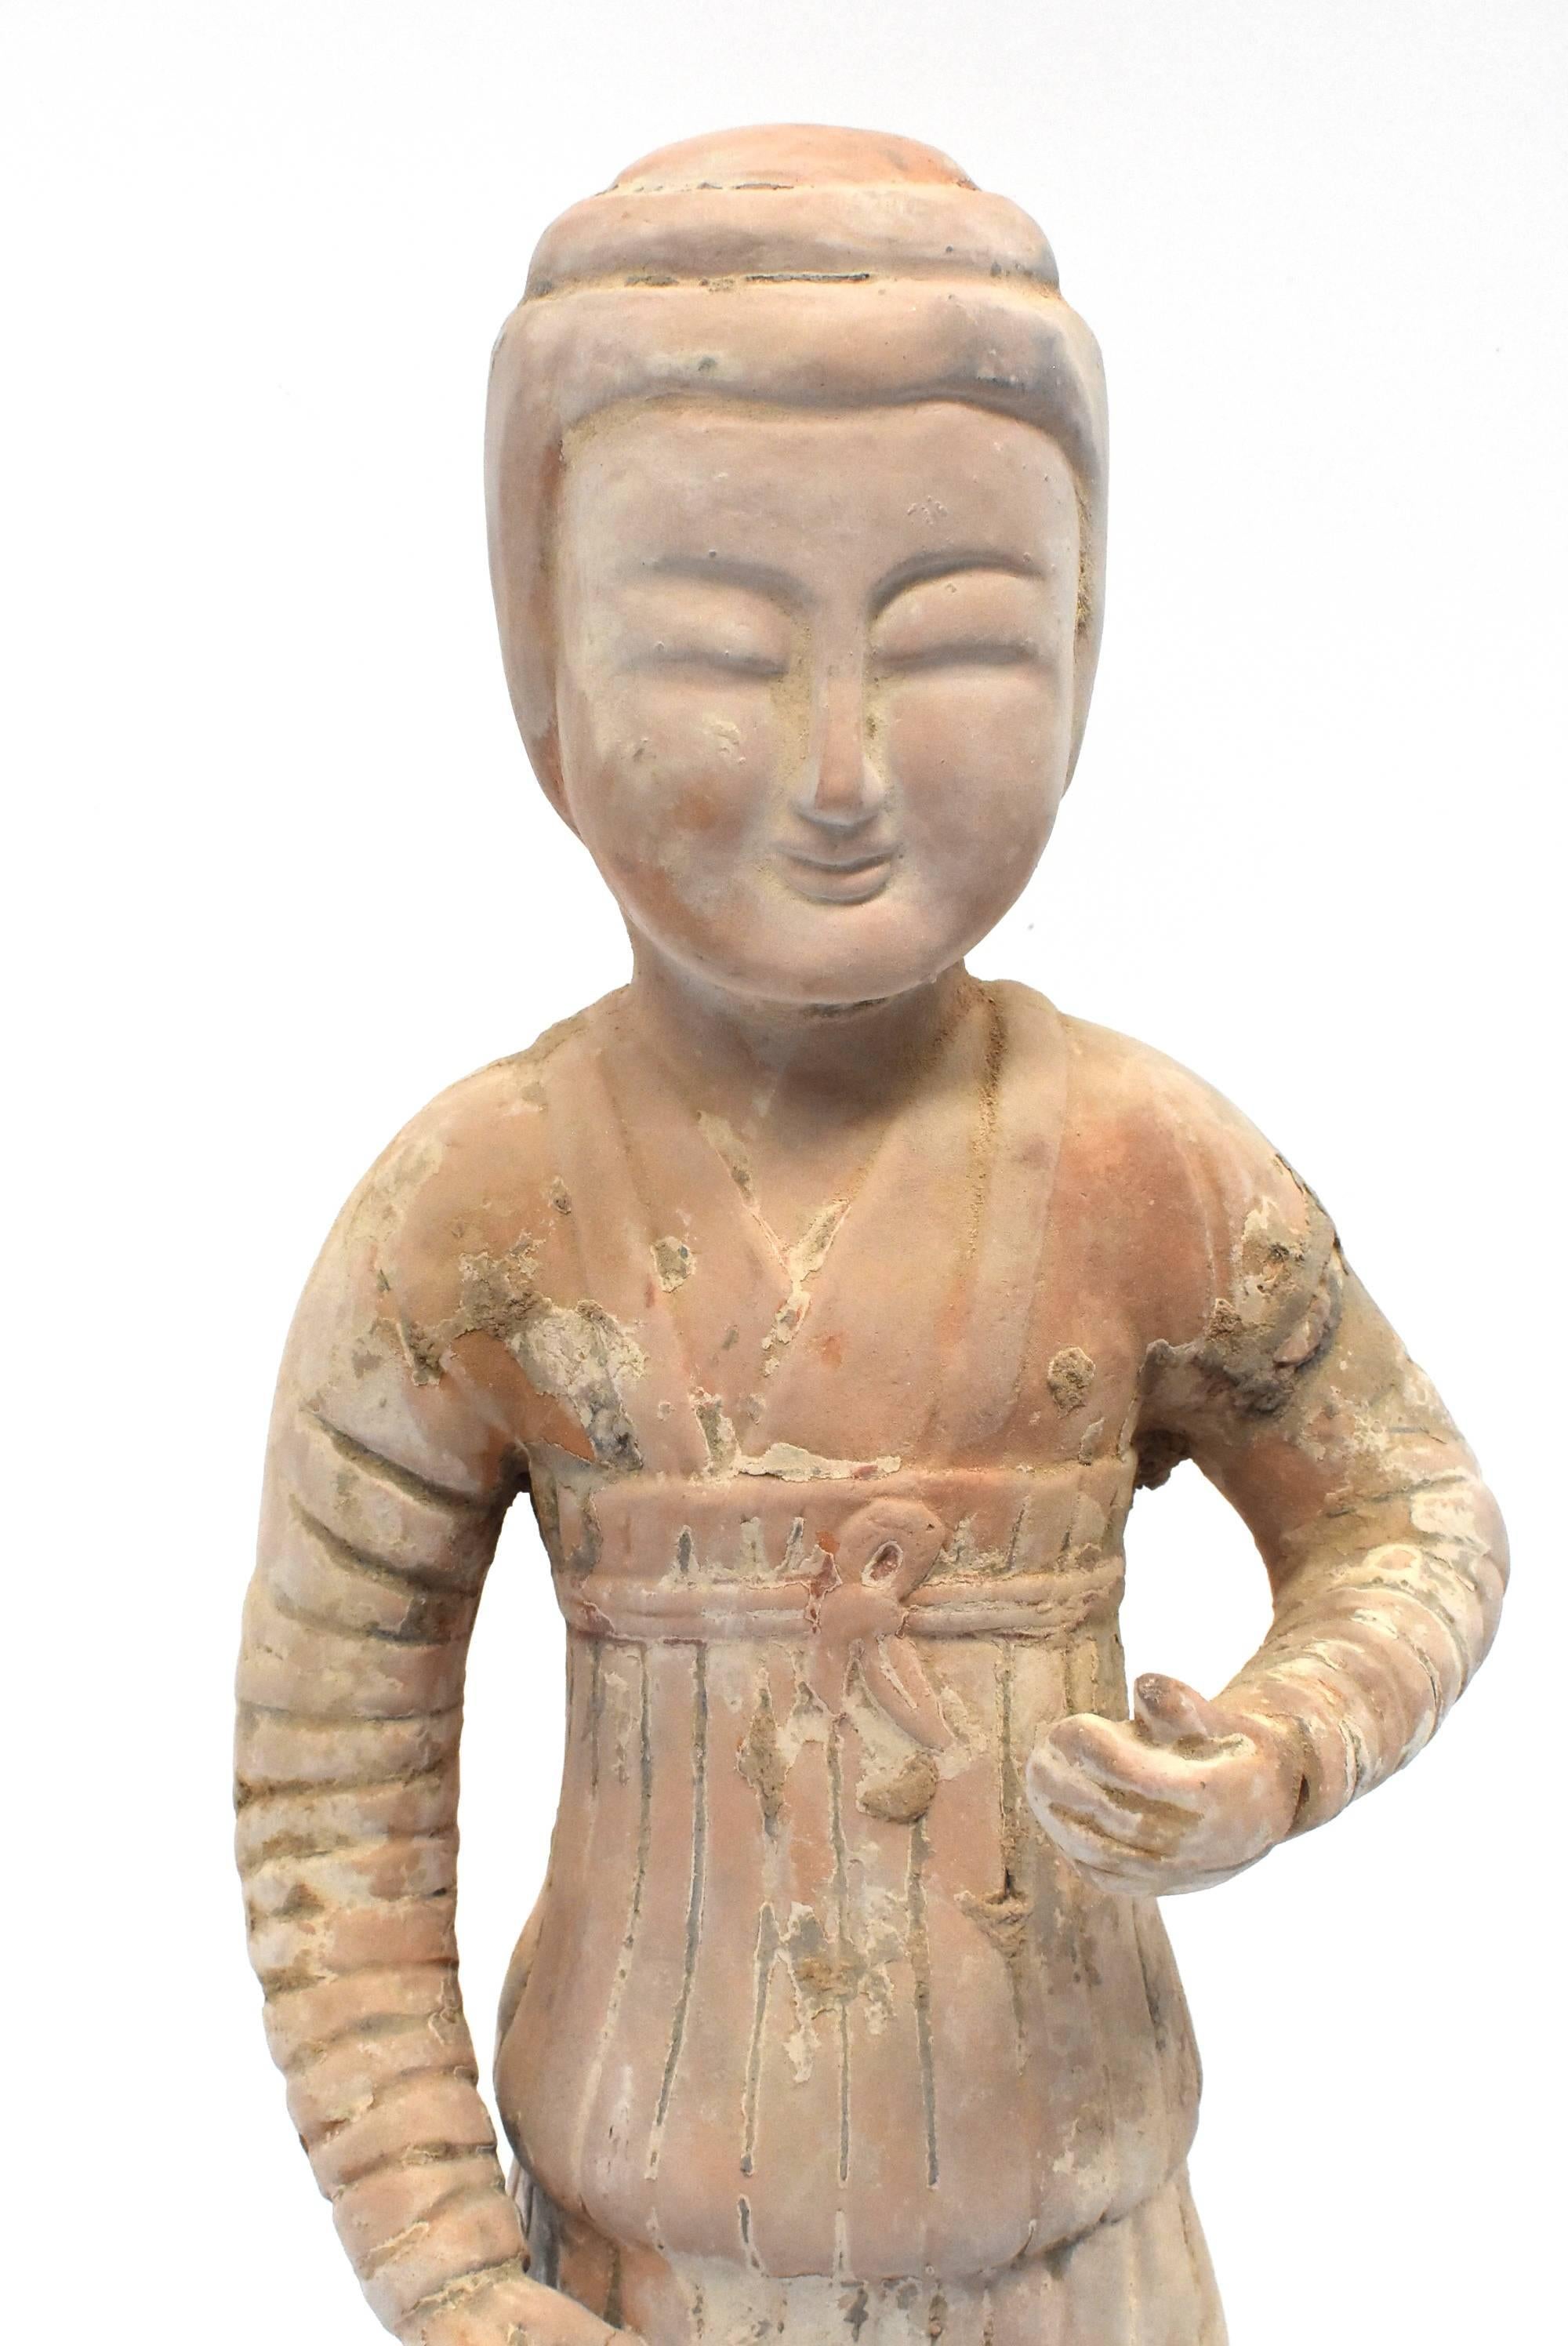 A beautiful terracotta court lady in the Han dynasty style. Featured is a governesses whose job is to train the ladies of the house all manners and etiquette, as well as the maids and servants proper ways of service. She is dressed in traditional